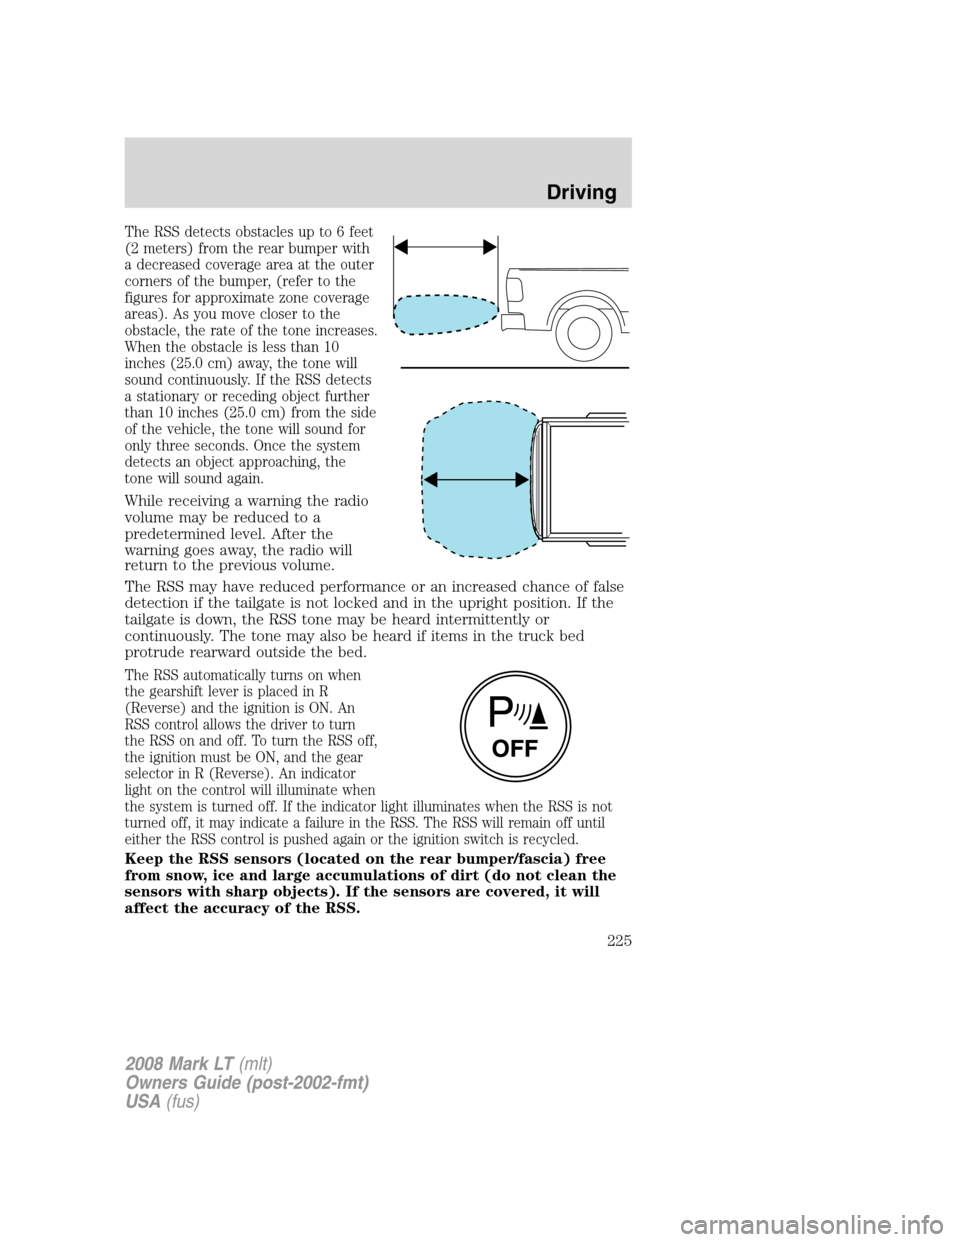 LINCOLN MARK LT 2008  Owners Manual The RSS detects obstacles up to 6 feet
(2 meters) from the rear bumper with
a decreased coverage area at the outer
corners of the bumper, (refer to the
figures for approximate zone coverage
areas). As